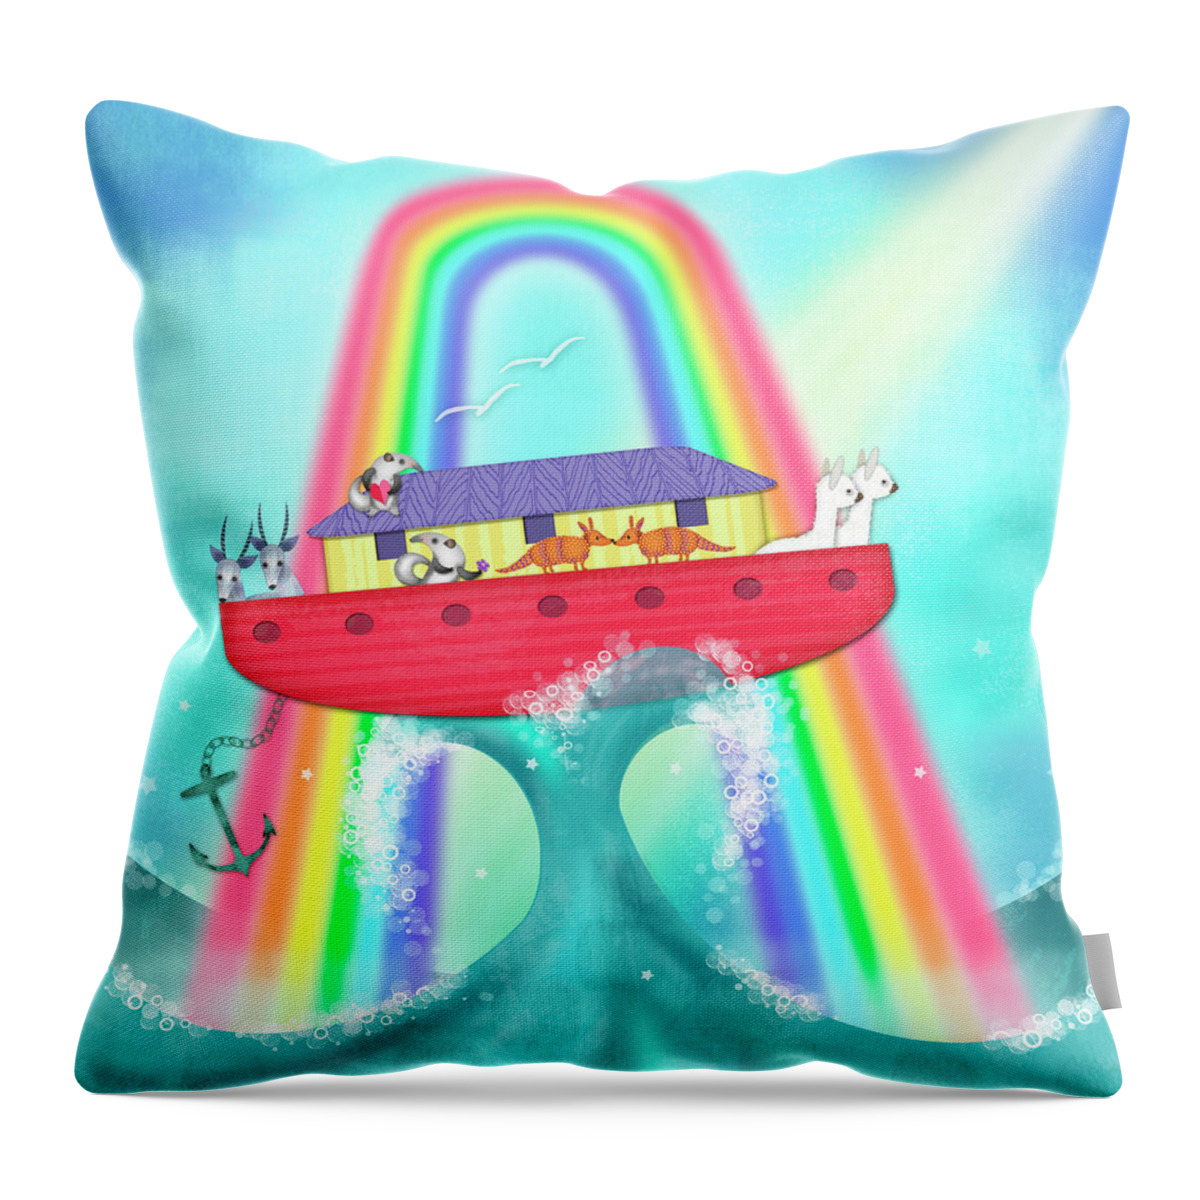 Ark Throw Pillow featuring the digital art A is for Ark by Valerie Drake Lesiak